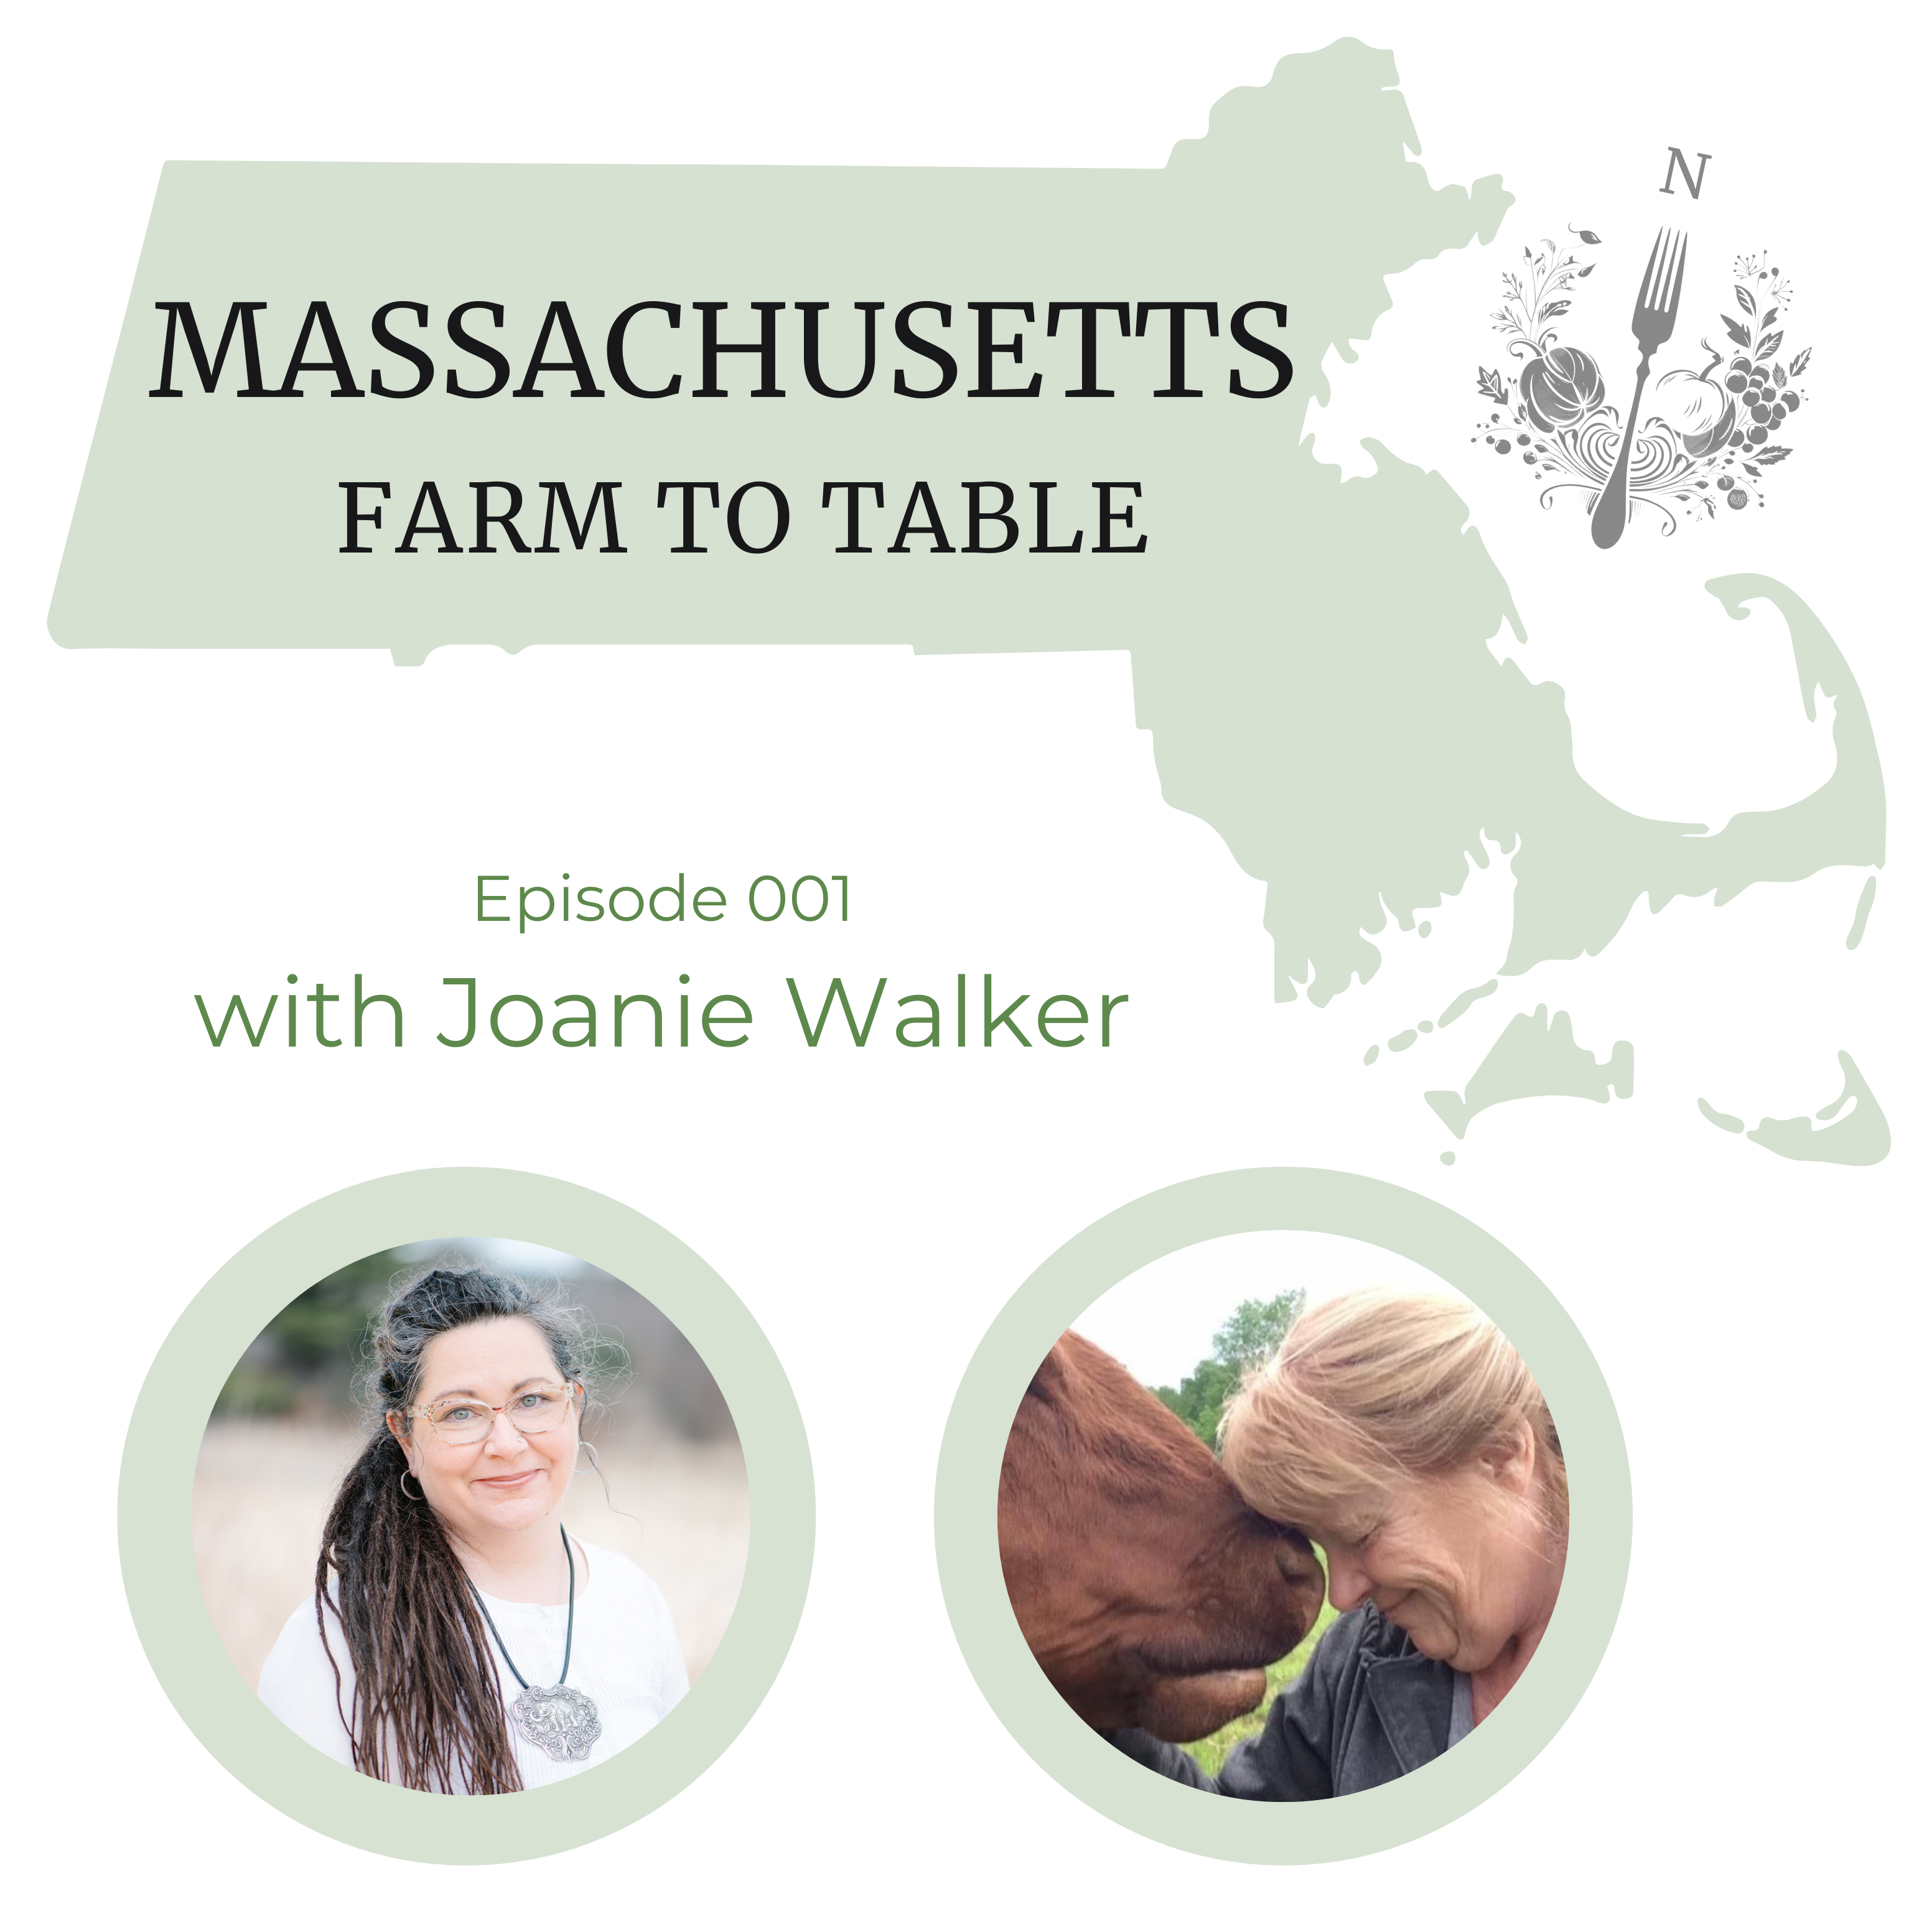 Massachusetts Farm to Table Podcast – Episode 001: Joanie Walker of Walker Farm at Whortleberry Hill